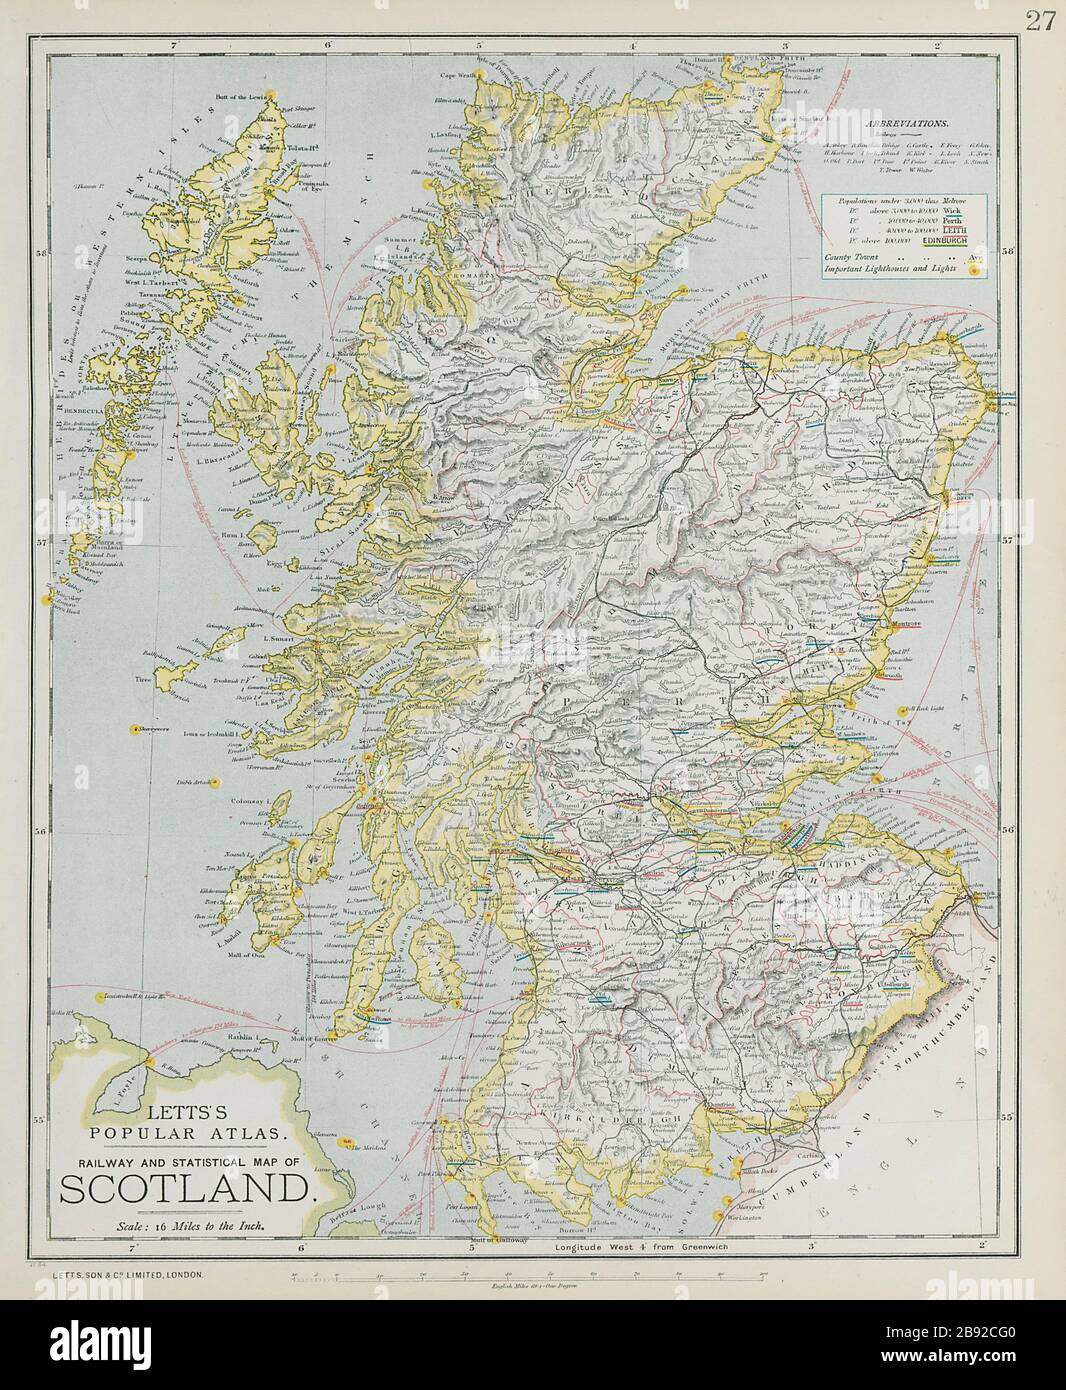 Scotland General Map Showing Counties Railways Lighthouses Letts 1884 2B92CG0 